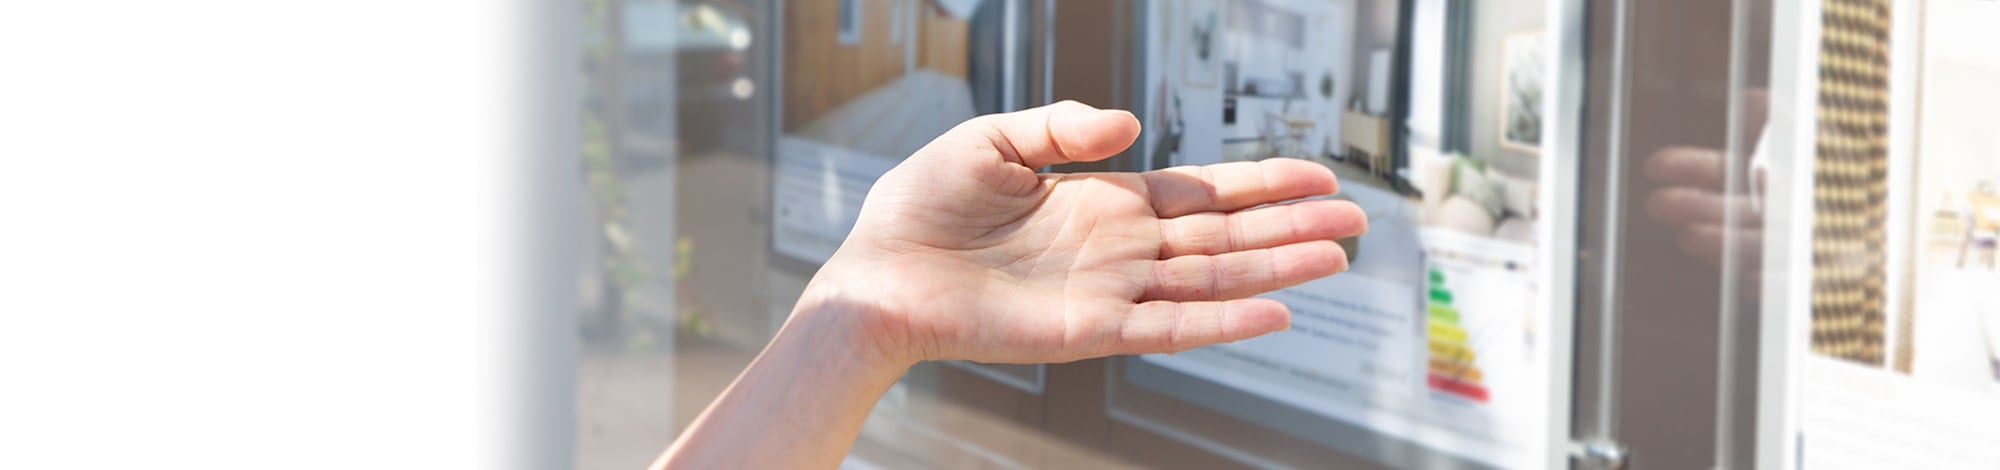 Person Pointing at a Window Showcasing Homes for Sale